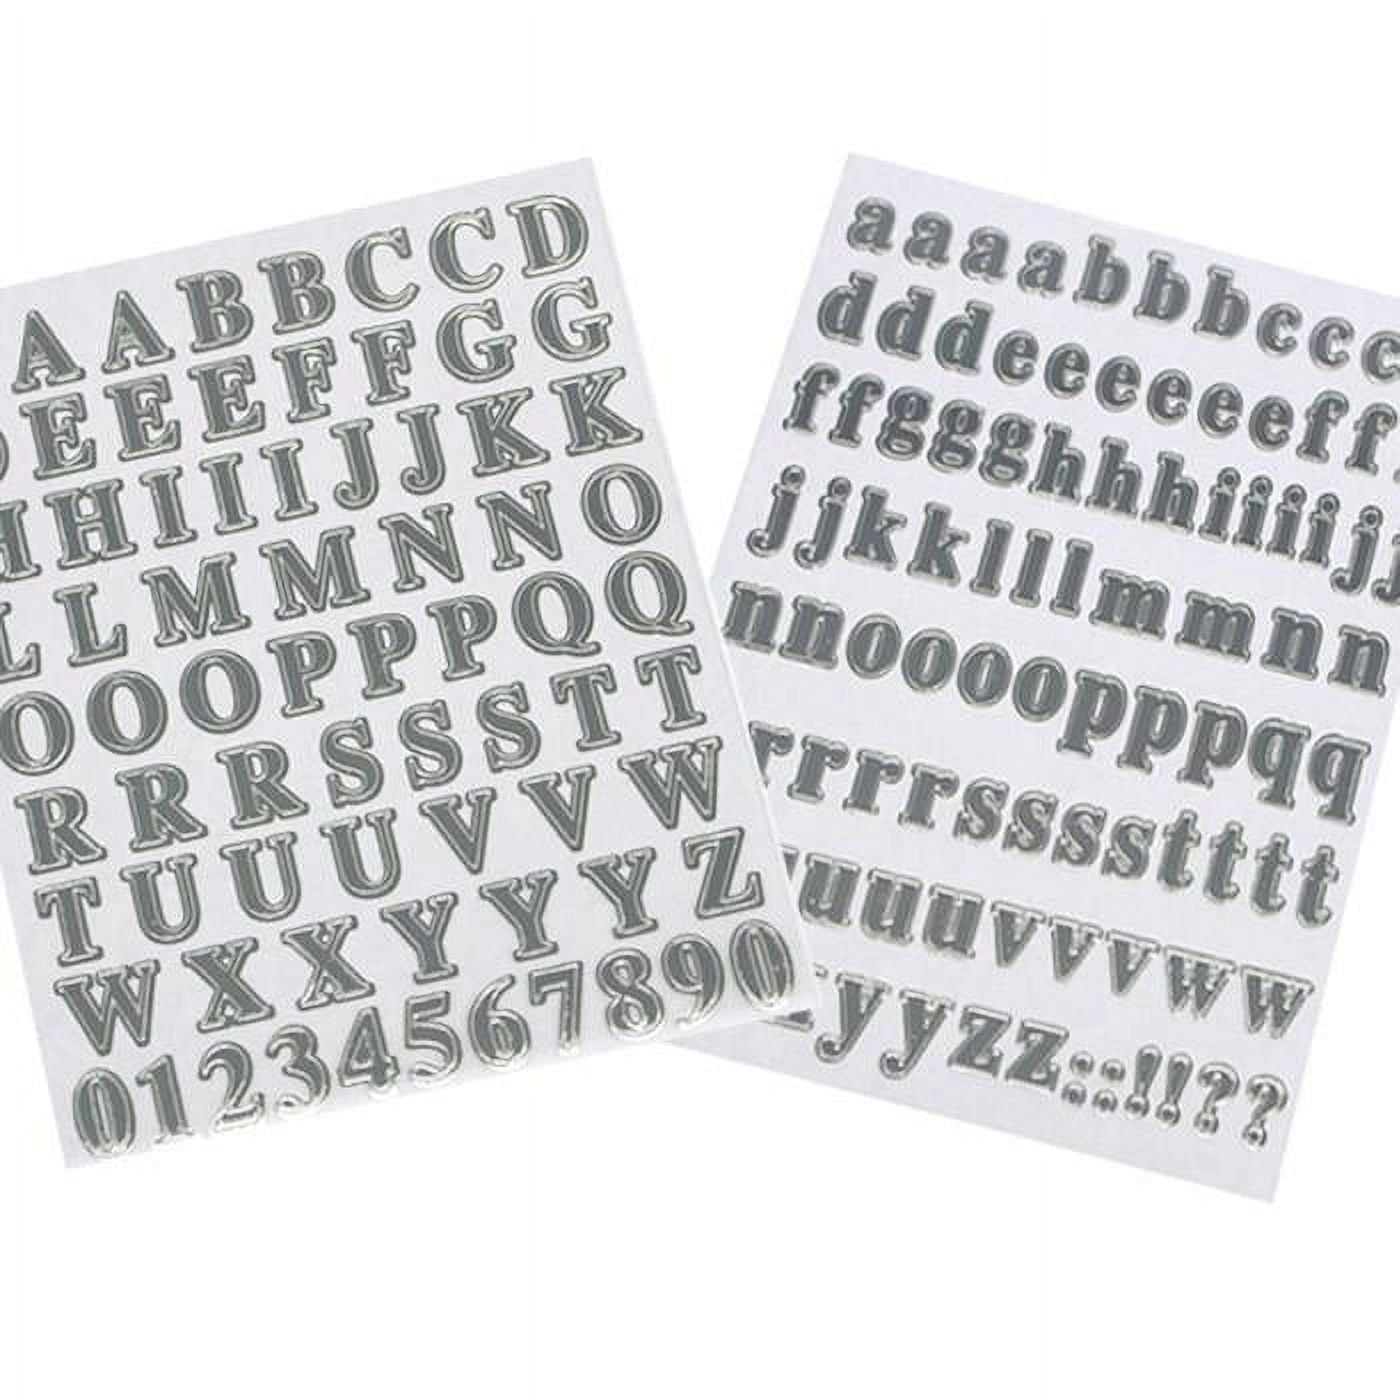 Artskills 1.25 in. Silver Gem Number and Letter Glitter Stickers, 130pc